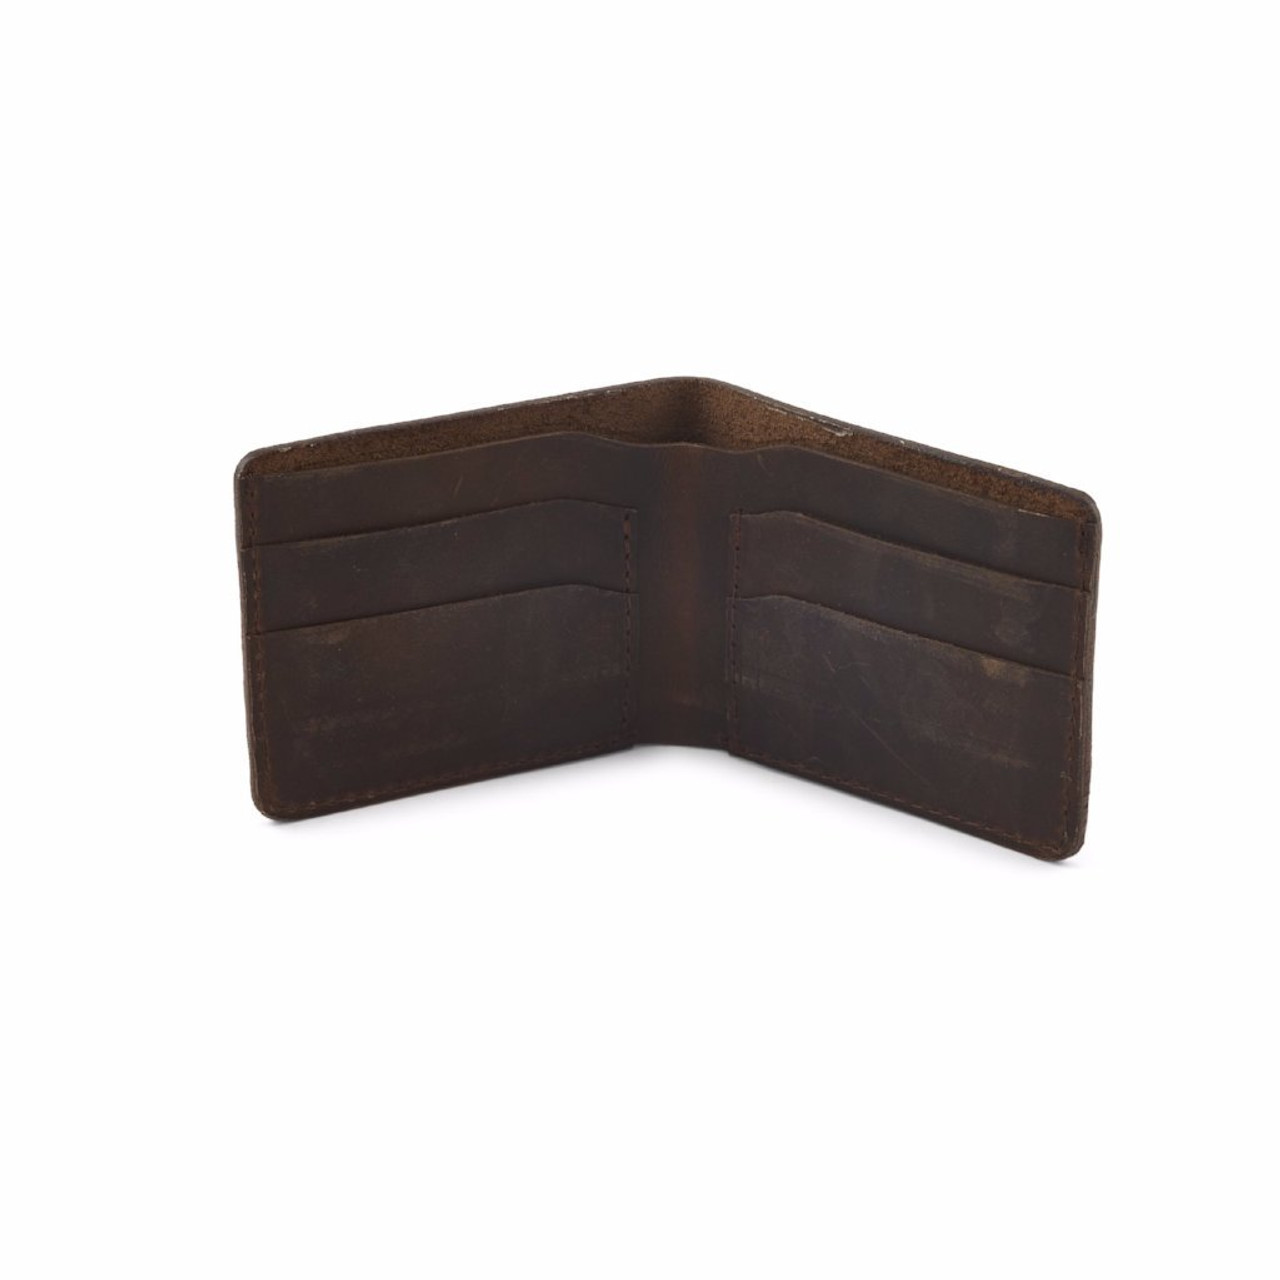 Rustico Knox Bifold Leather Wallet Saddle